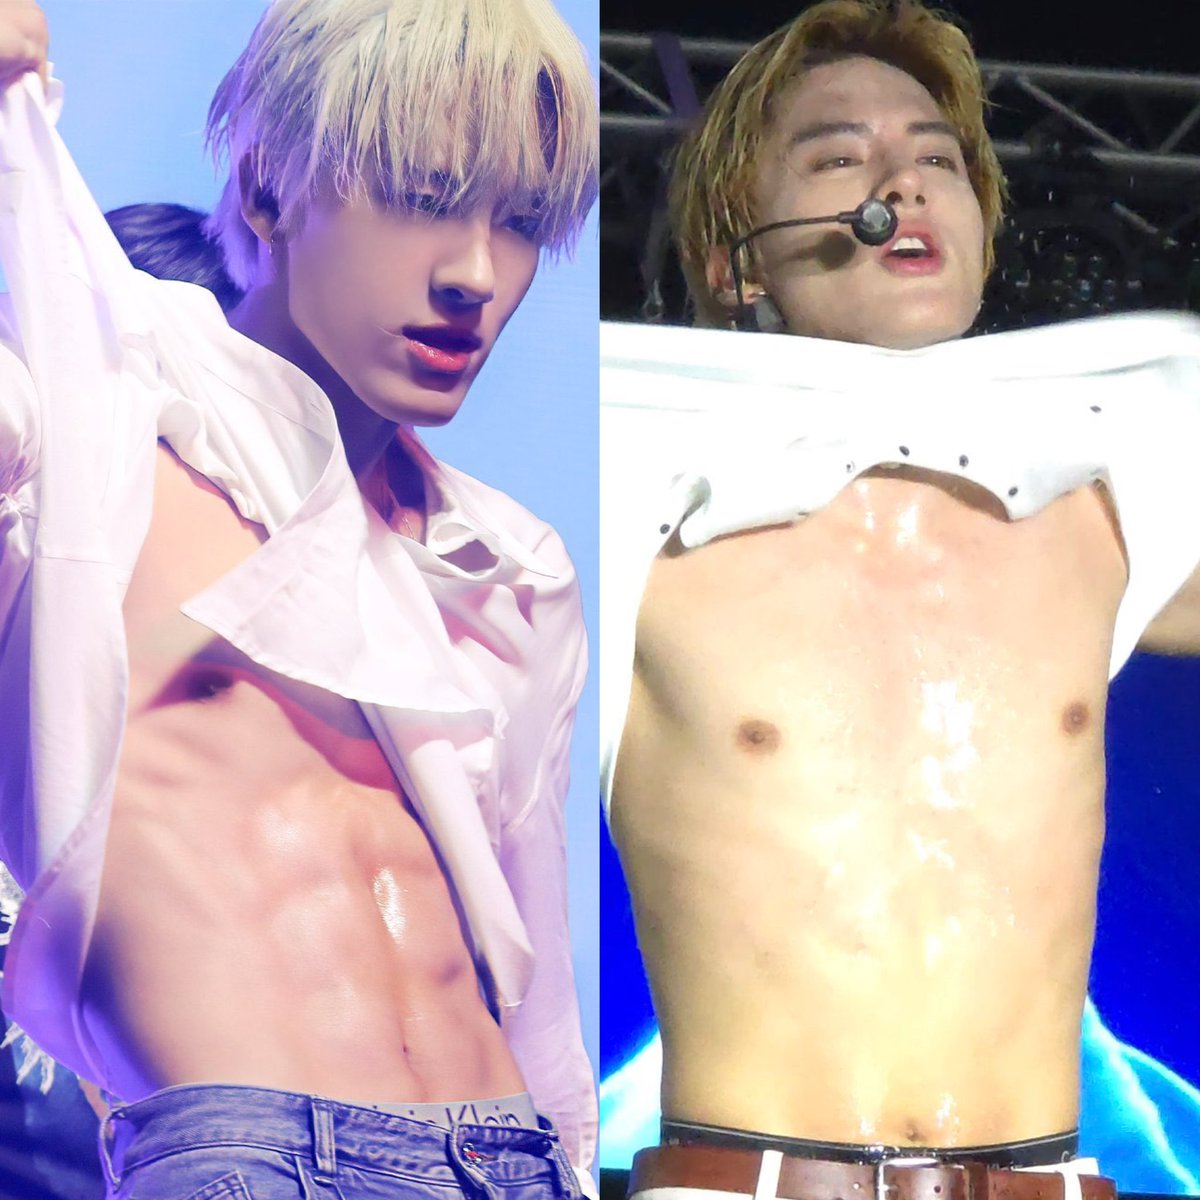 eric went from teasing us with his abs to almost taking his shirt off… 😫